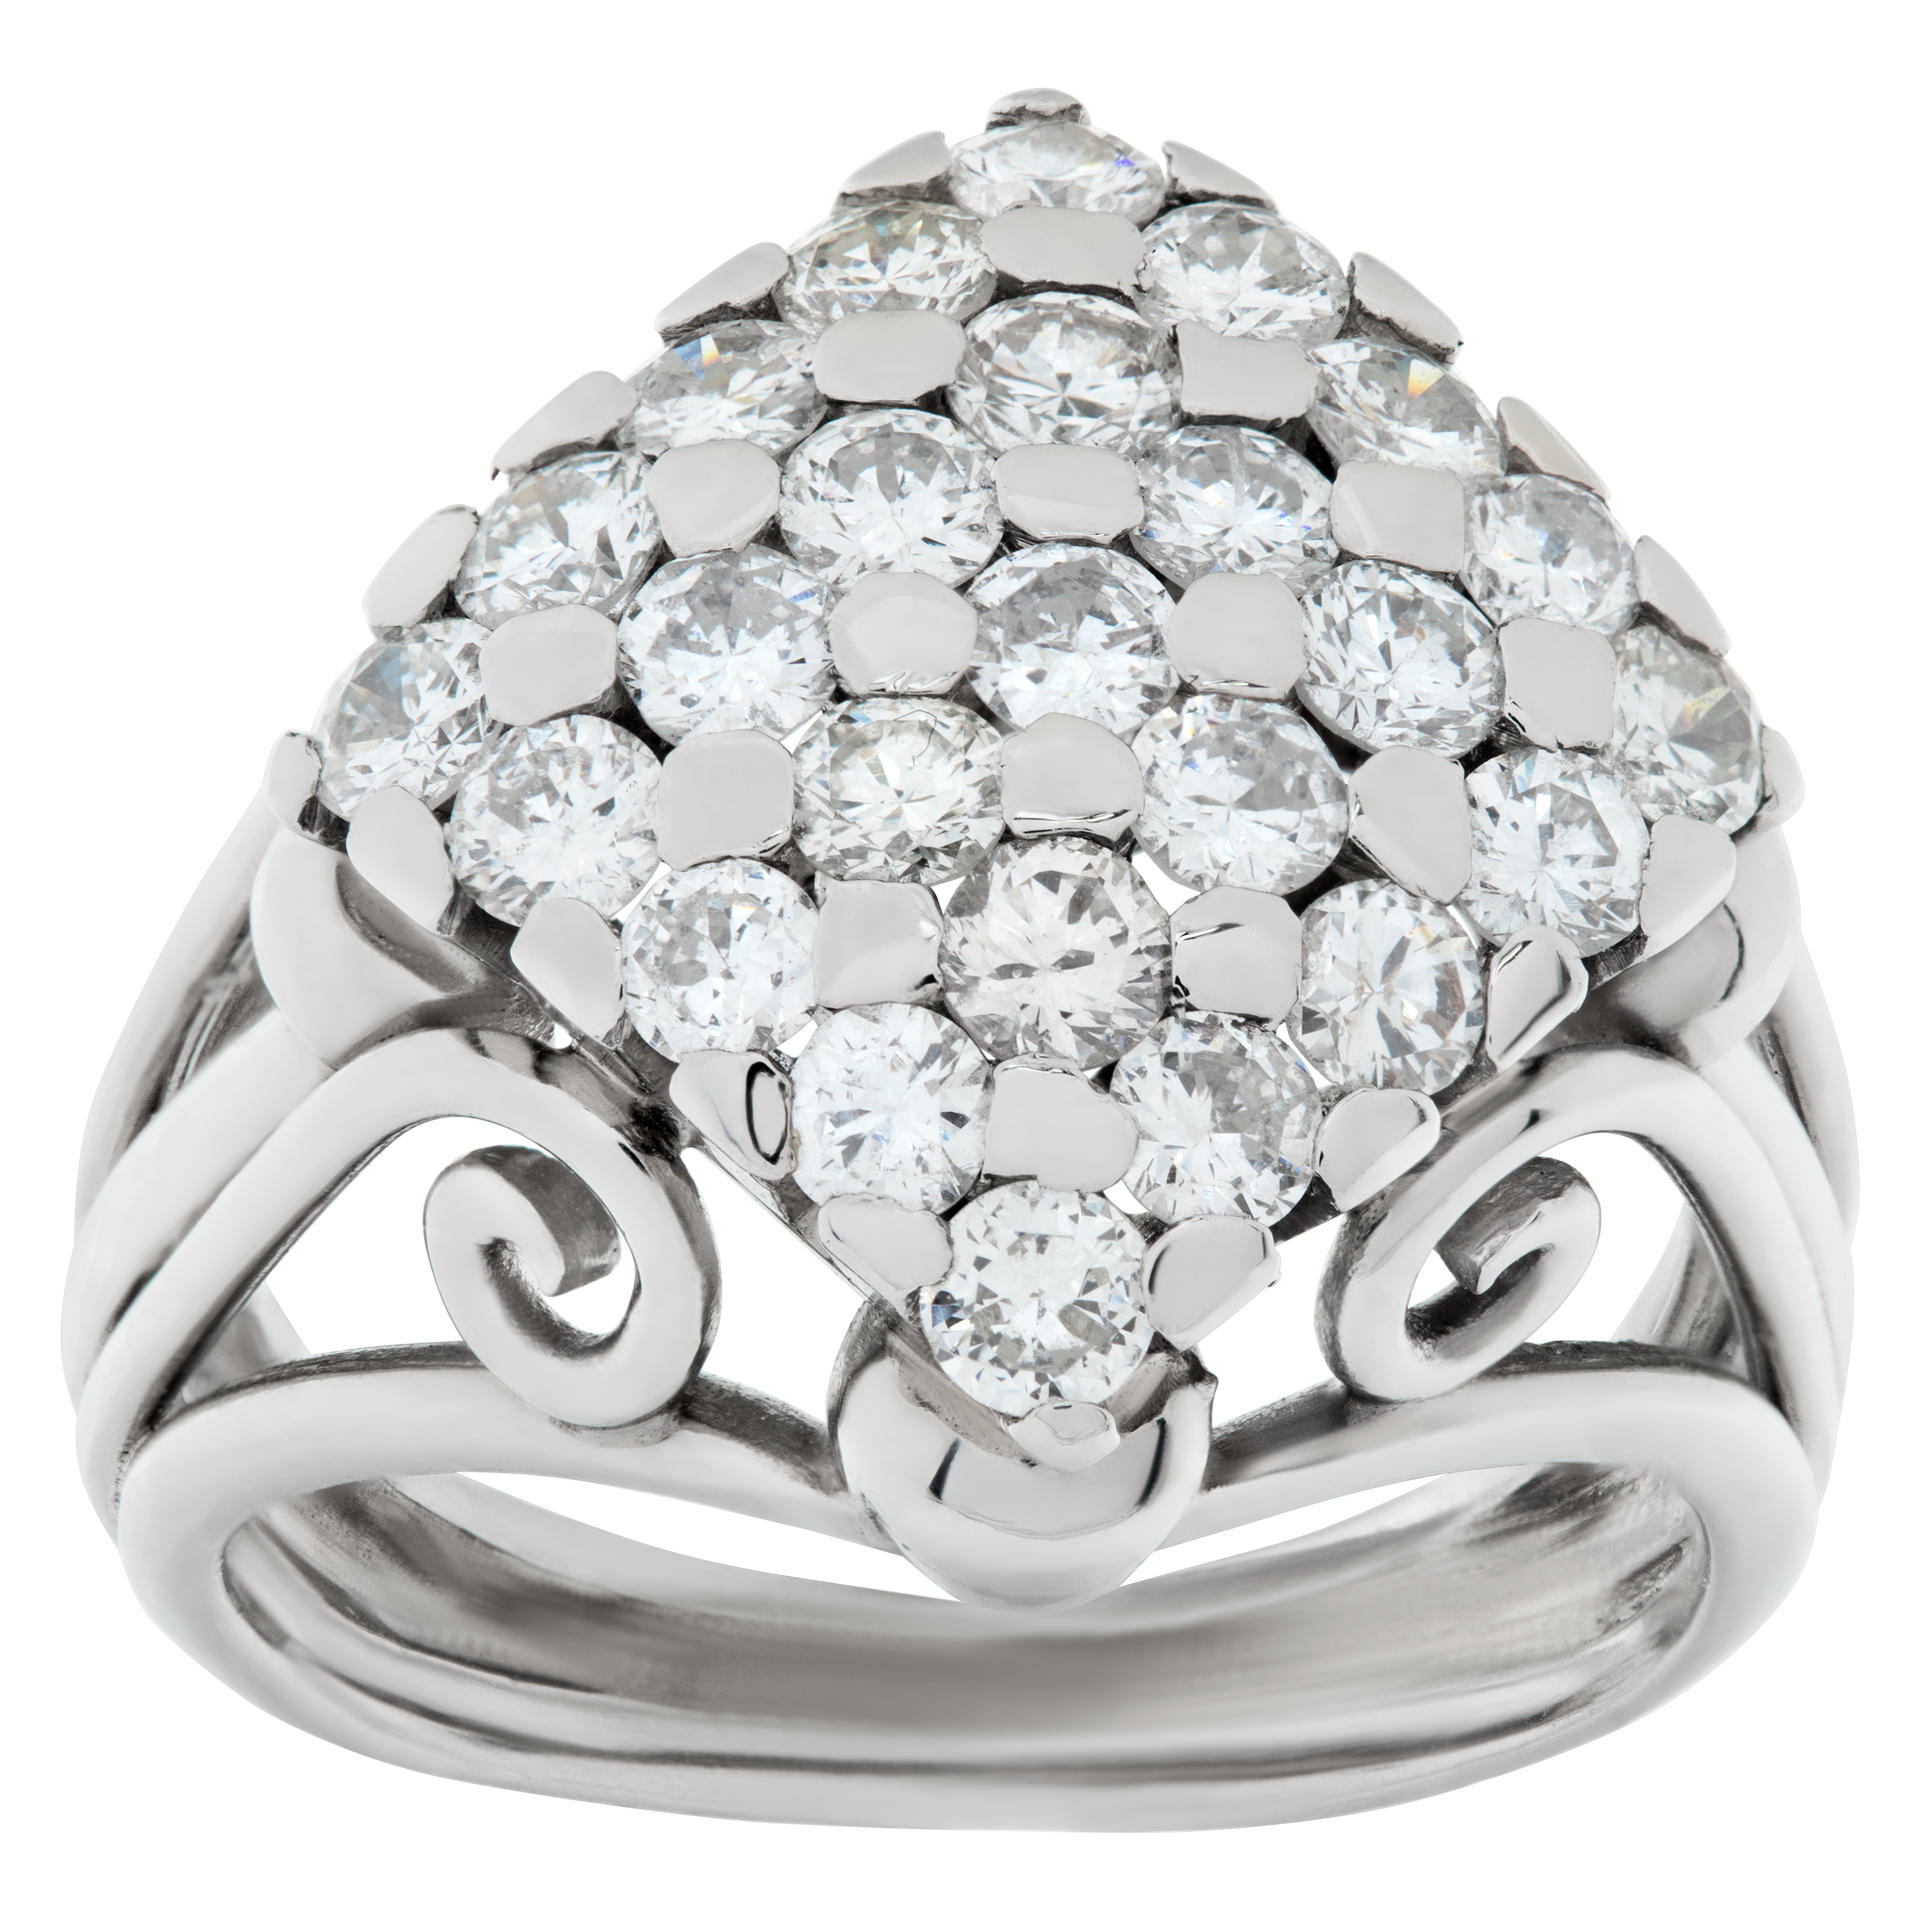 Art Deco Platinum Ring With Approx 1.0 Carats In Pave Diamonds-Circa 1940'S image 1